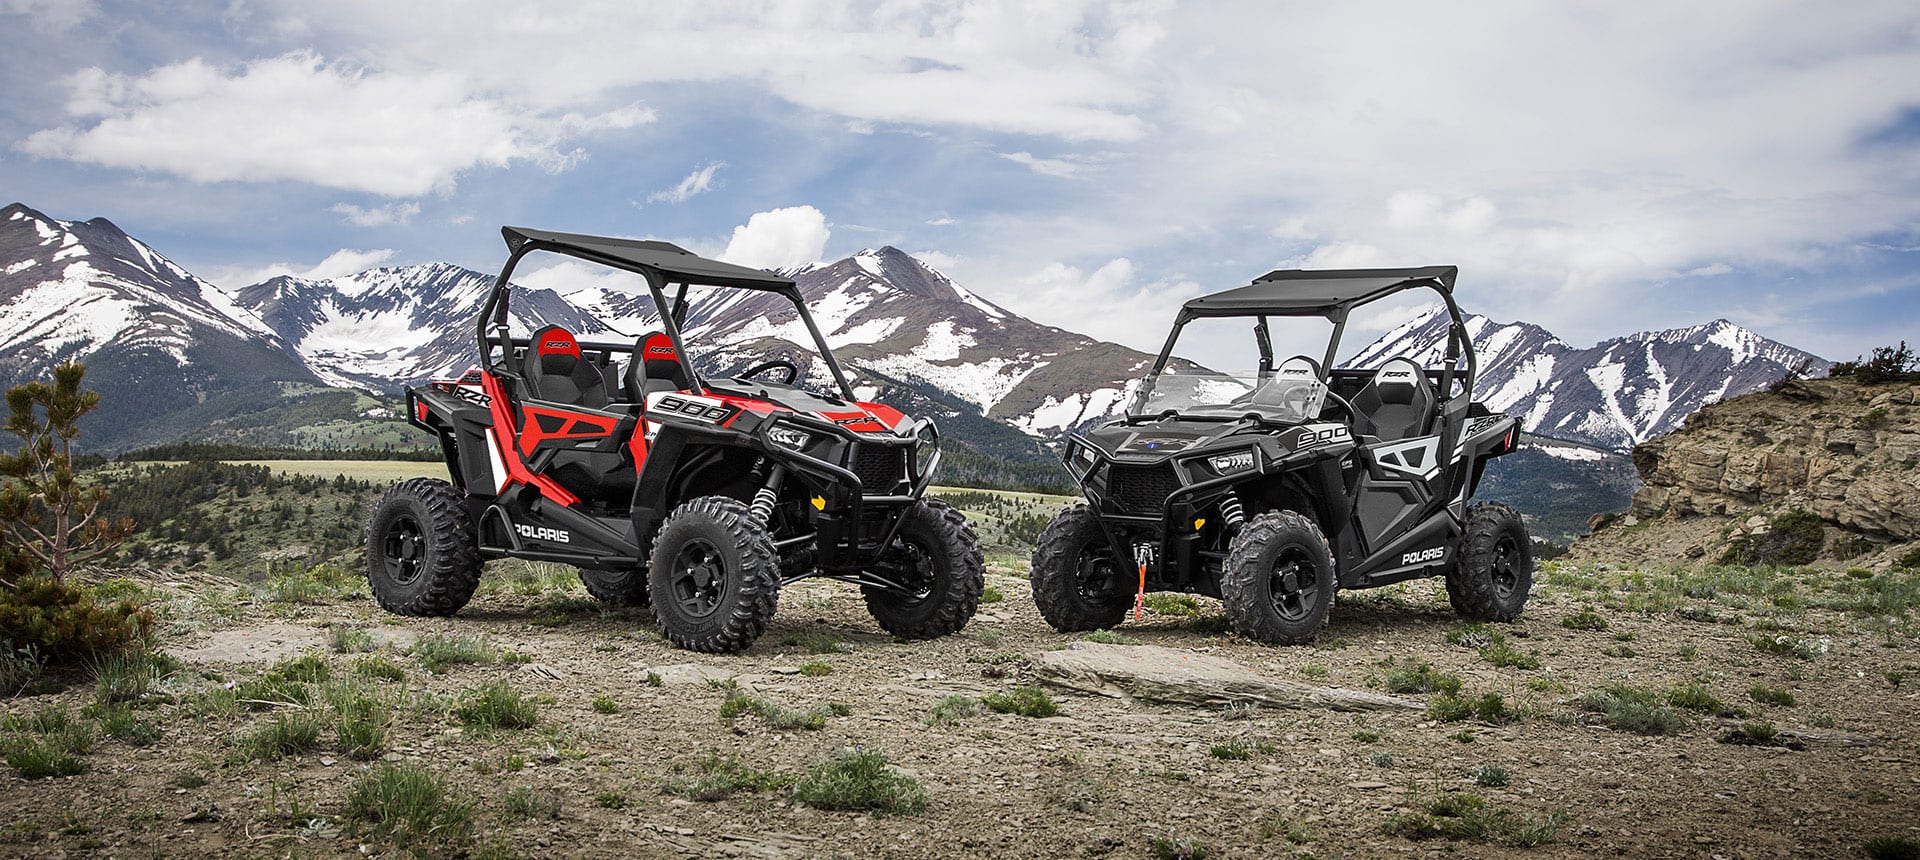 RZR 900 OFFROAD VEHICLE